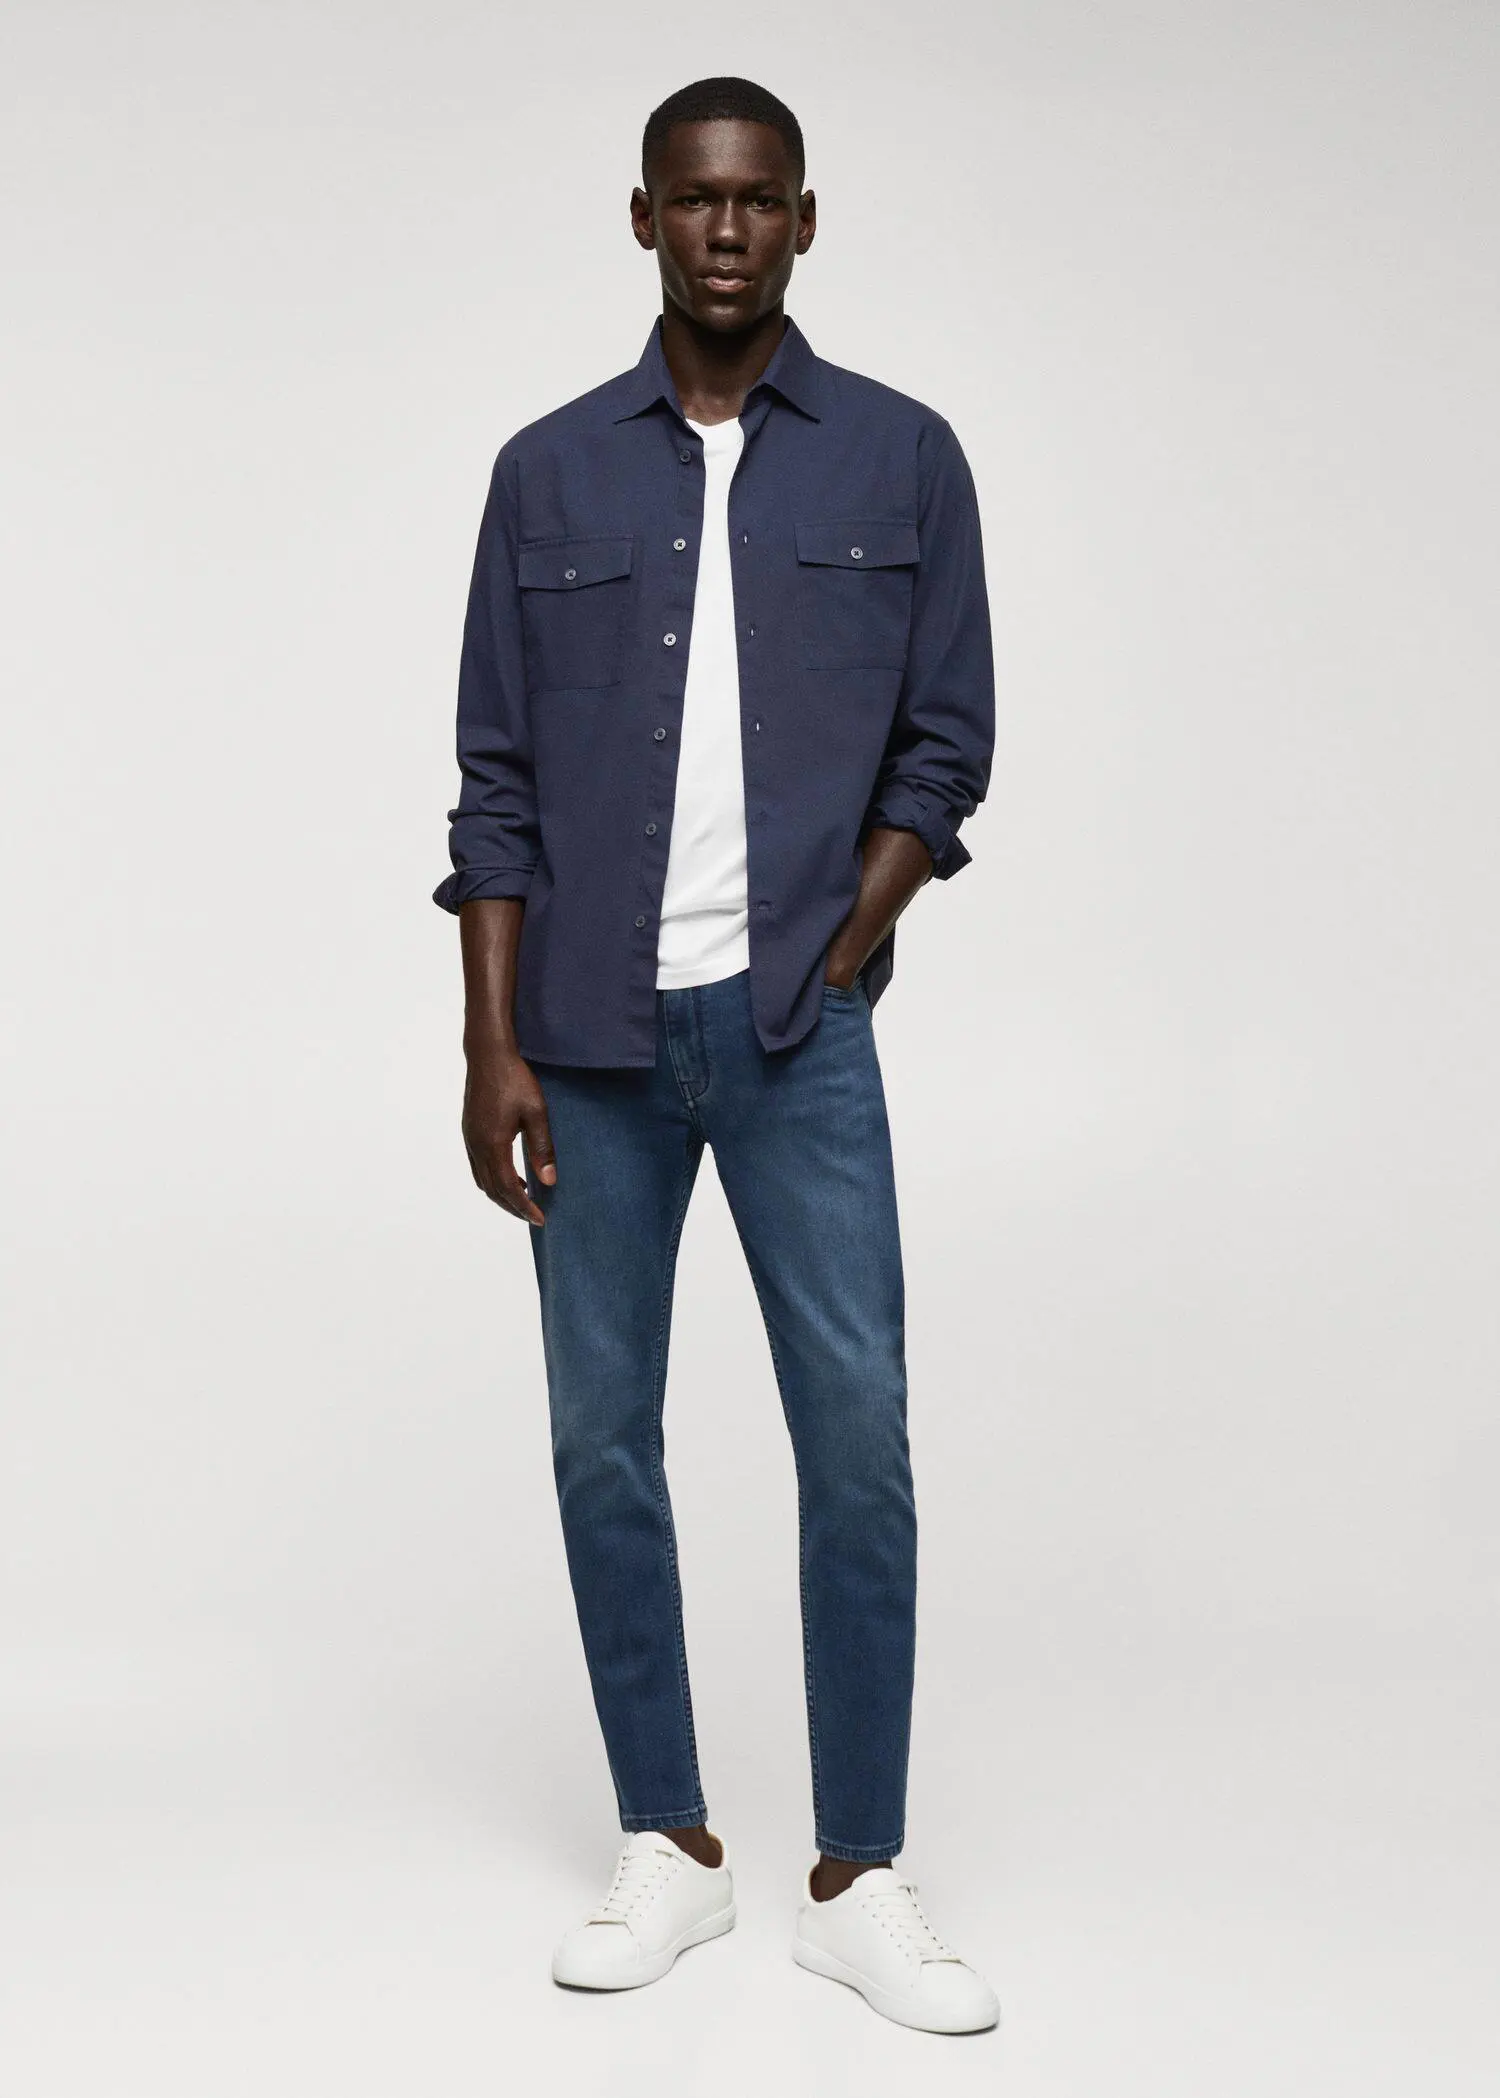 Mango Jeans Tom tapered cropped. 1